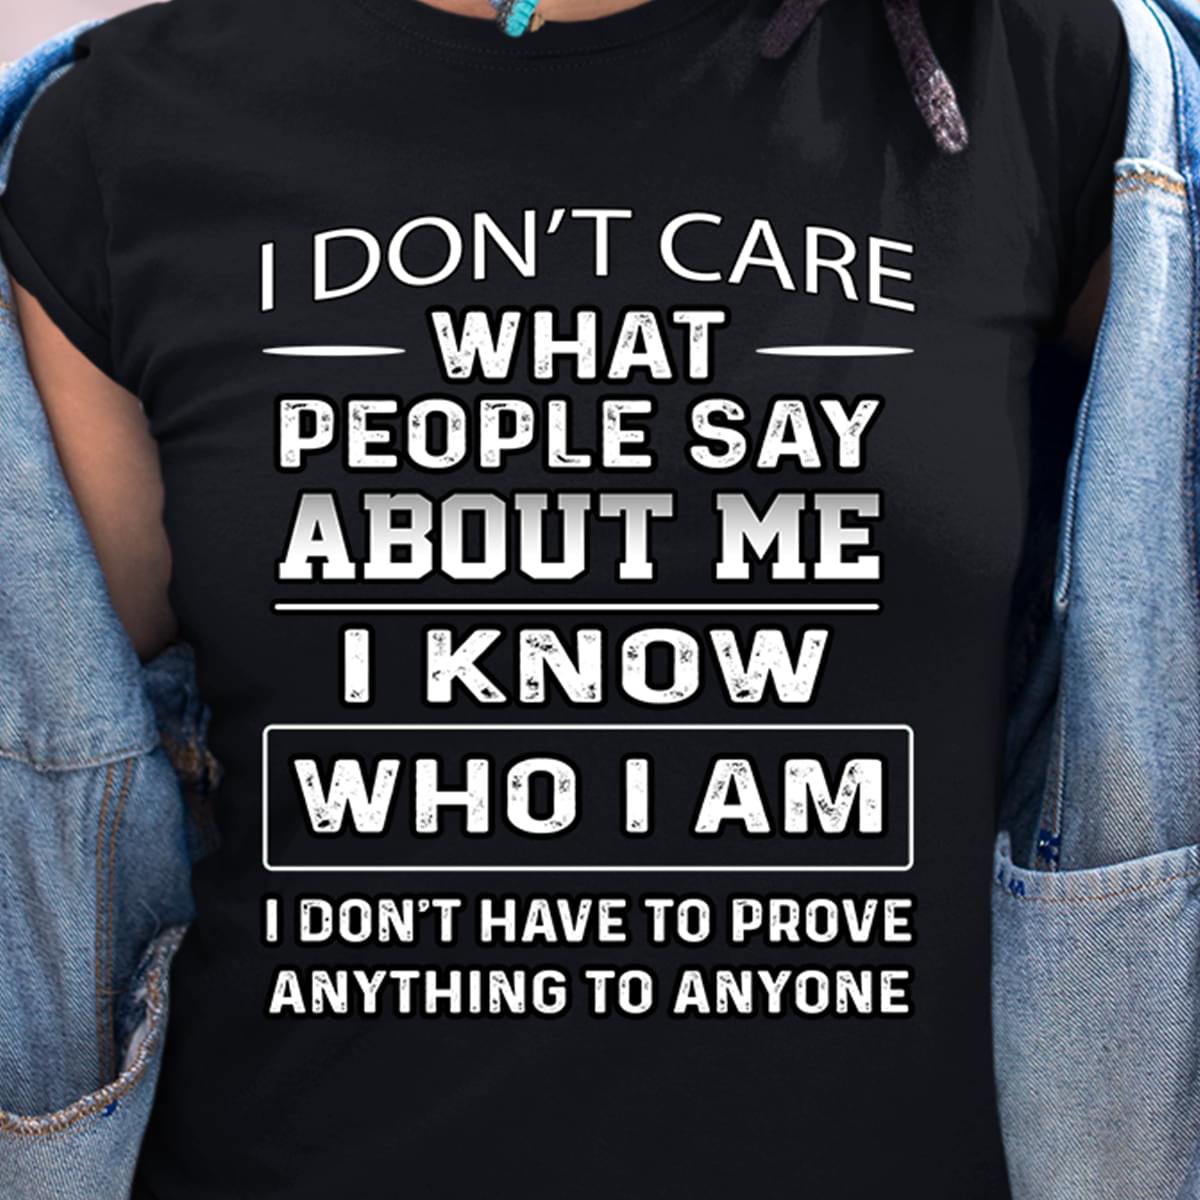 I Dont Care What People Say About Me I Know Who I Am I Don't Have To Prove  Anything To Anyone Cotton T-Shirt